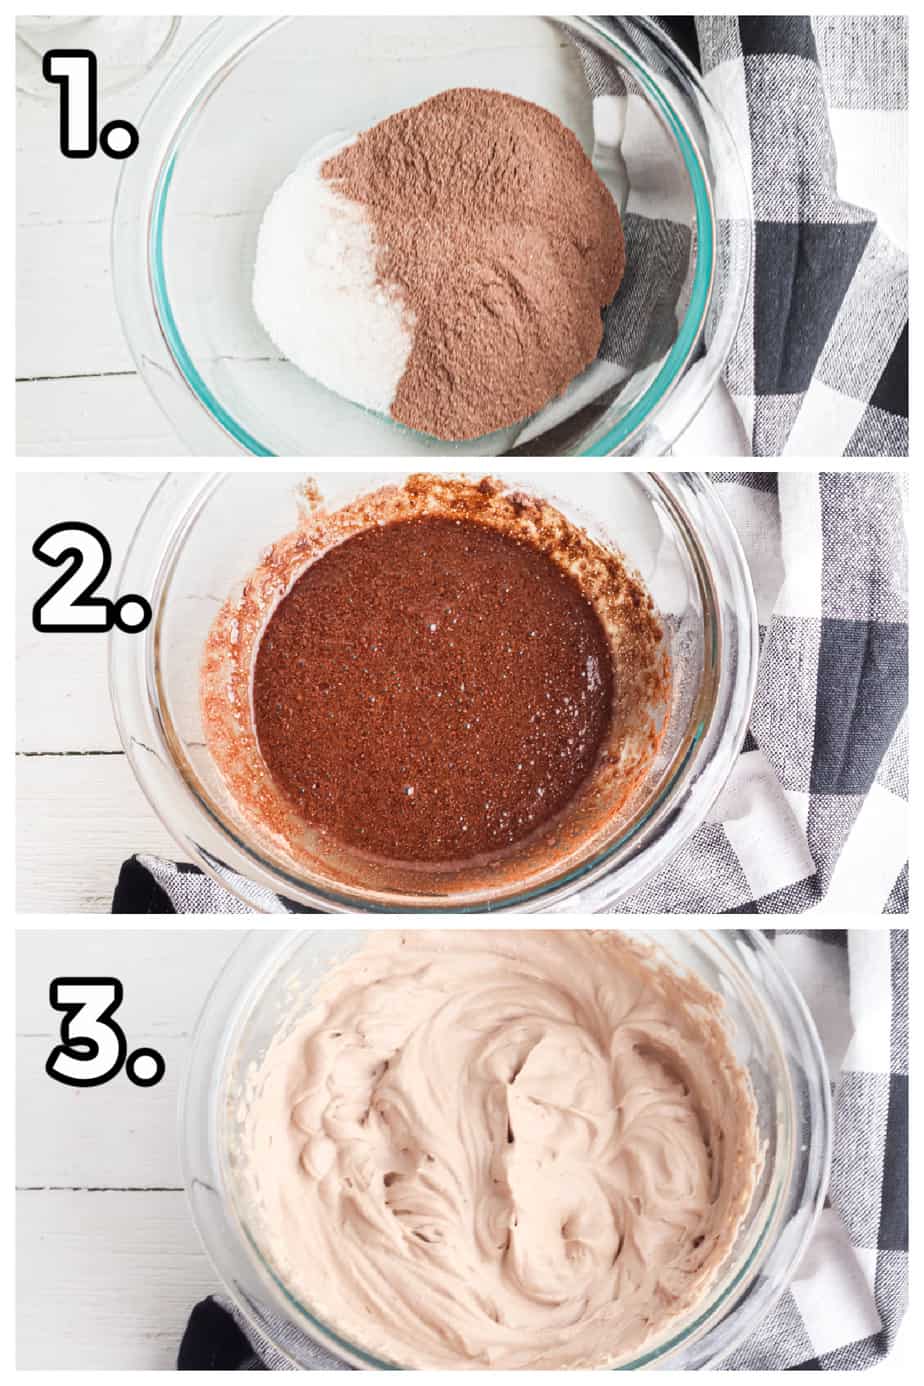 Showing how to mix, blend and whip the hot chocolate whipping cream